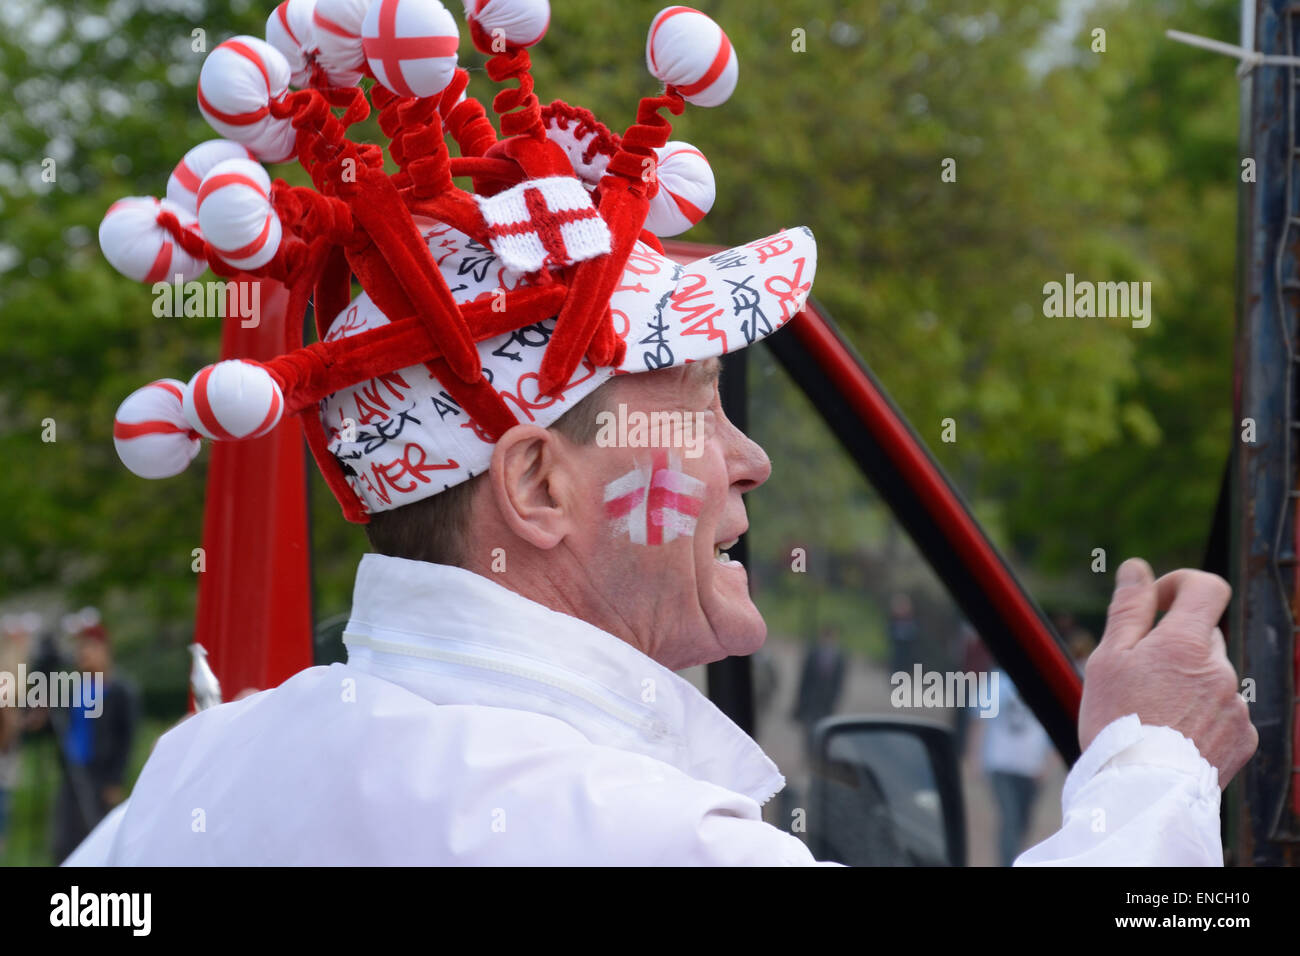 Crazy Head Dress, at St George's Day parade. Nottingham, England. Stock Photo